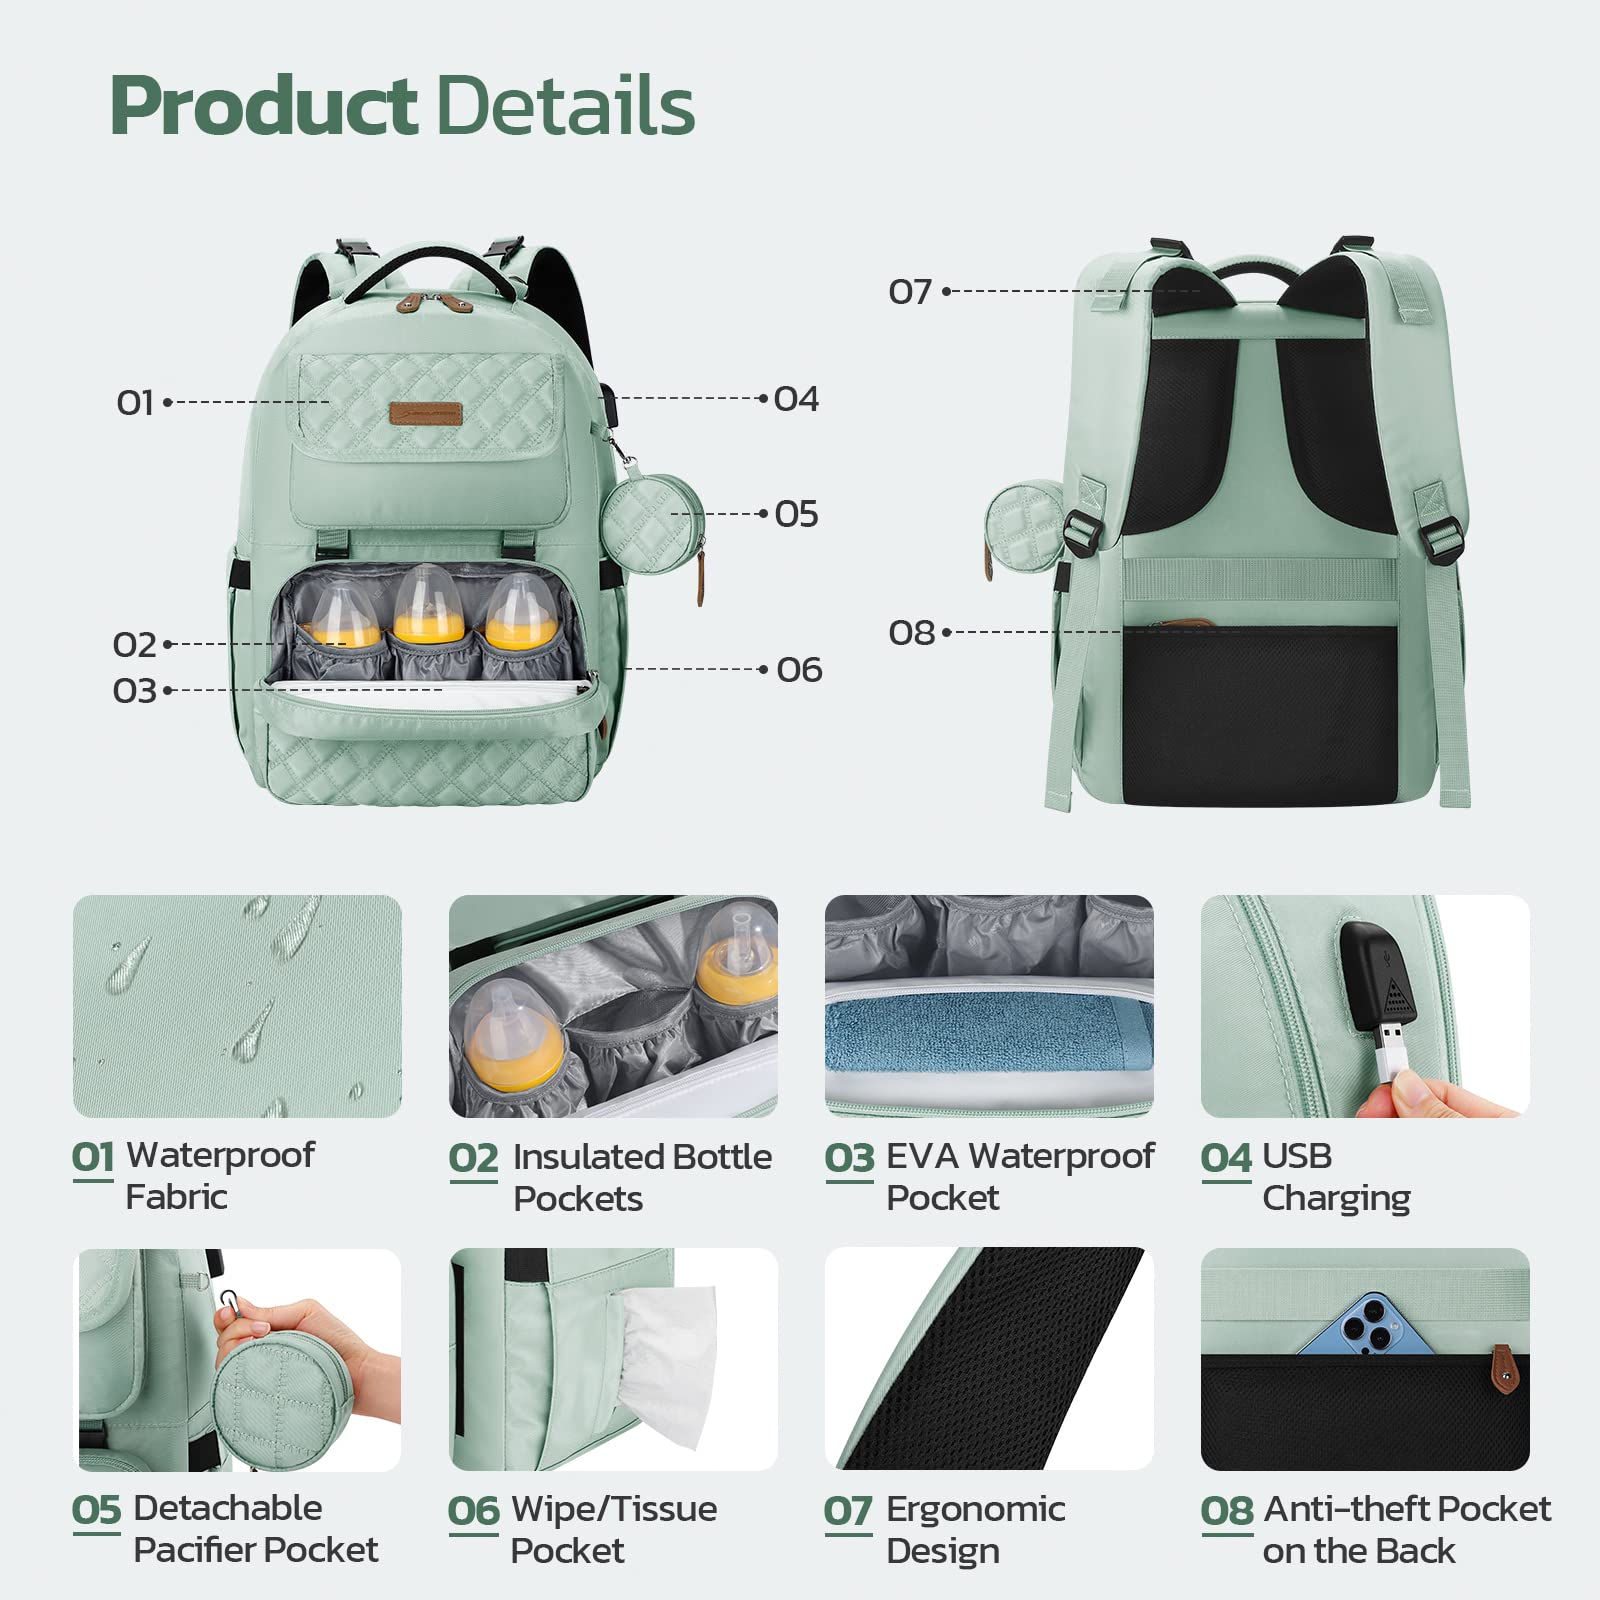 Maelstrom Diaper Bag Backpack,29L-45L Expandable Large Baby Bag for 2 Kids/Twins with Removable Cross Body Bottle Bag for Mom/Dad,Stylish Nappy Bag Gift for Boys/Girl-Mothers Day Gifts-Mint Green